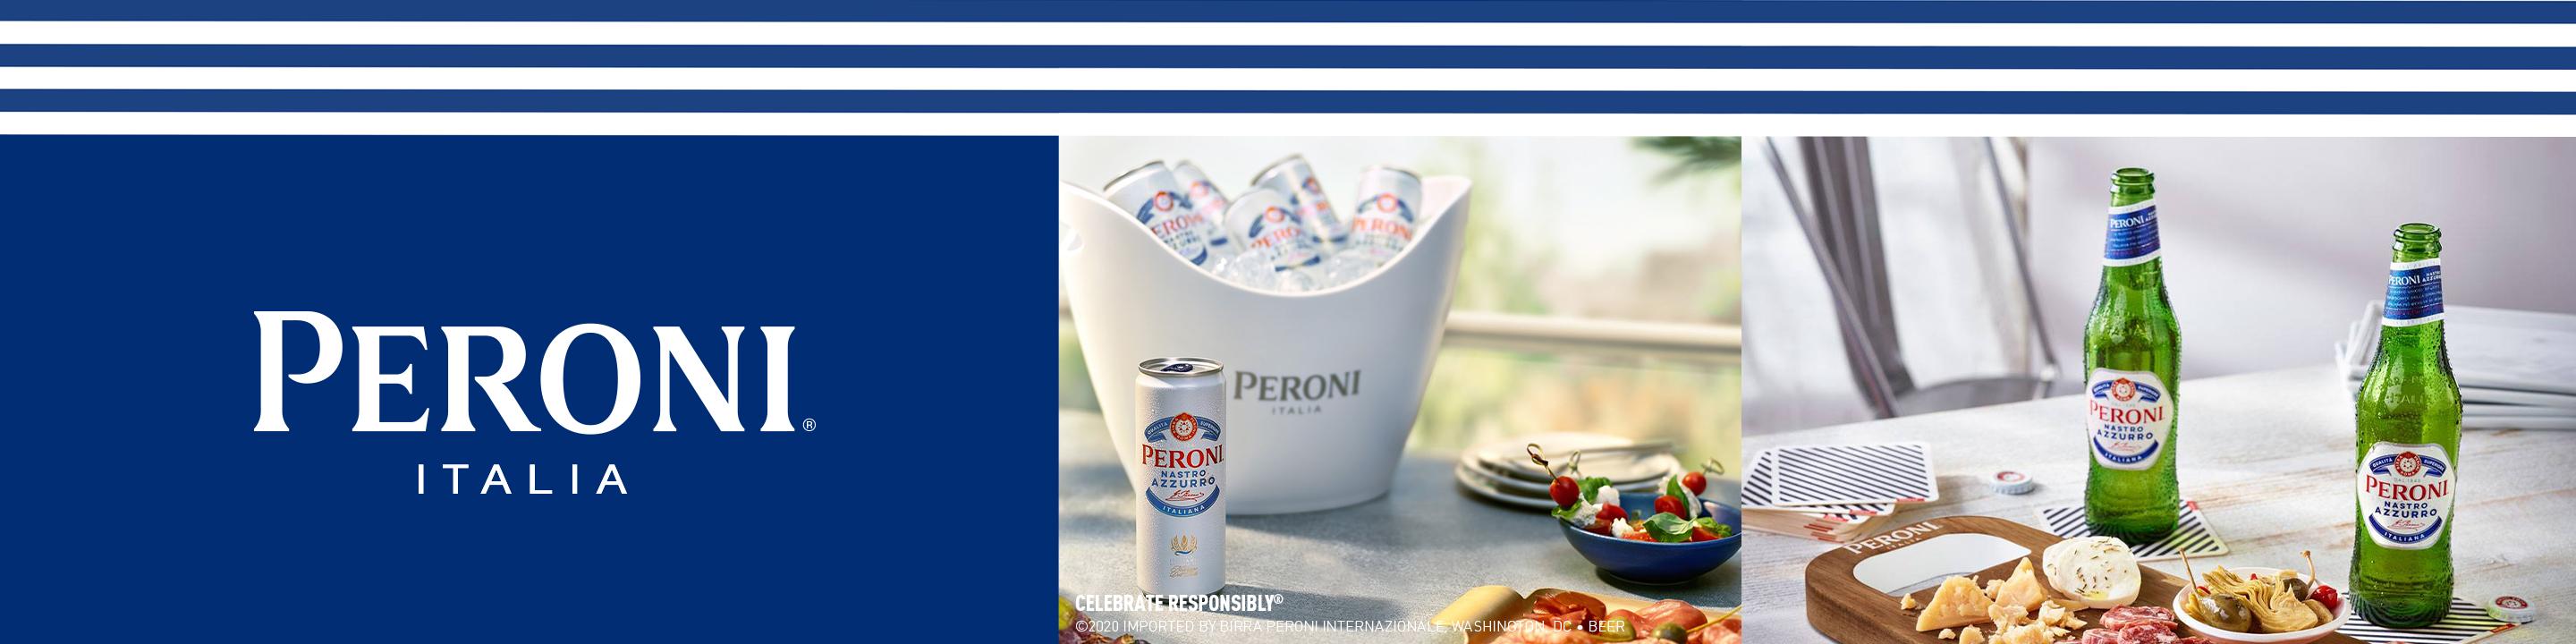 Get the authentic taste of Italy delivered right to you. Peroni Nastro Azzurro is a premium Italian lager with a crisp, refreshing taste that elevates every occasion. Enjoy the classic, effortless Italian style of Peroni at home and sip elegantly. Whatever you do, do it beautifully.